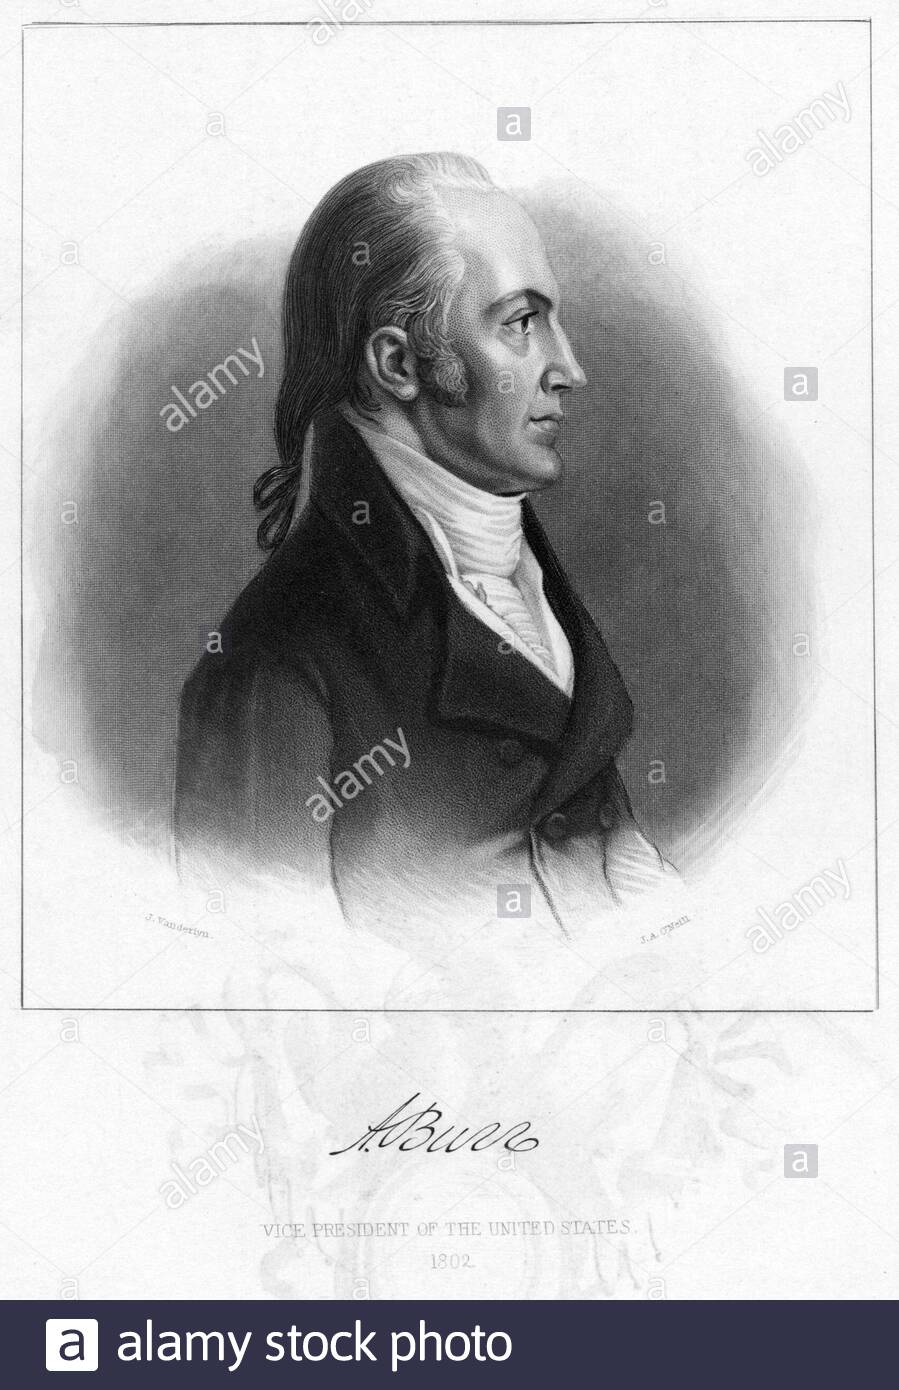 Aaron Burr Jr., 1756 – 1836, was an American politician and lawyer. He served as the third vice president of the United States during President Thomas Jefferson's first term from 1801 to 1805, vintage illustration from the 1800s Stock Photo